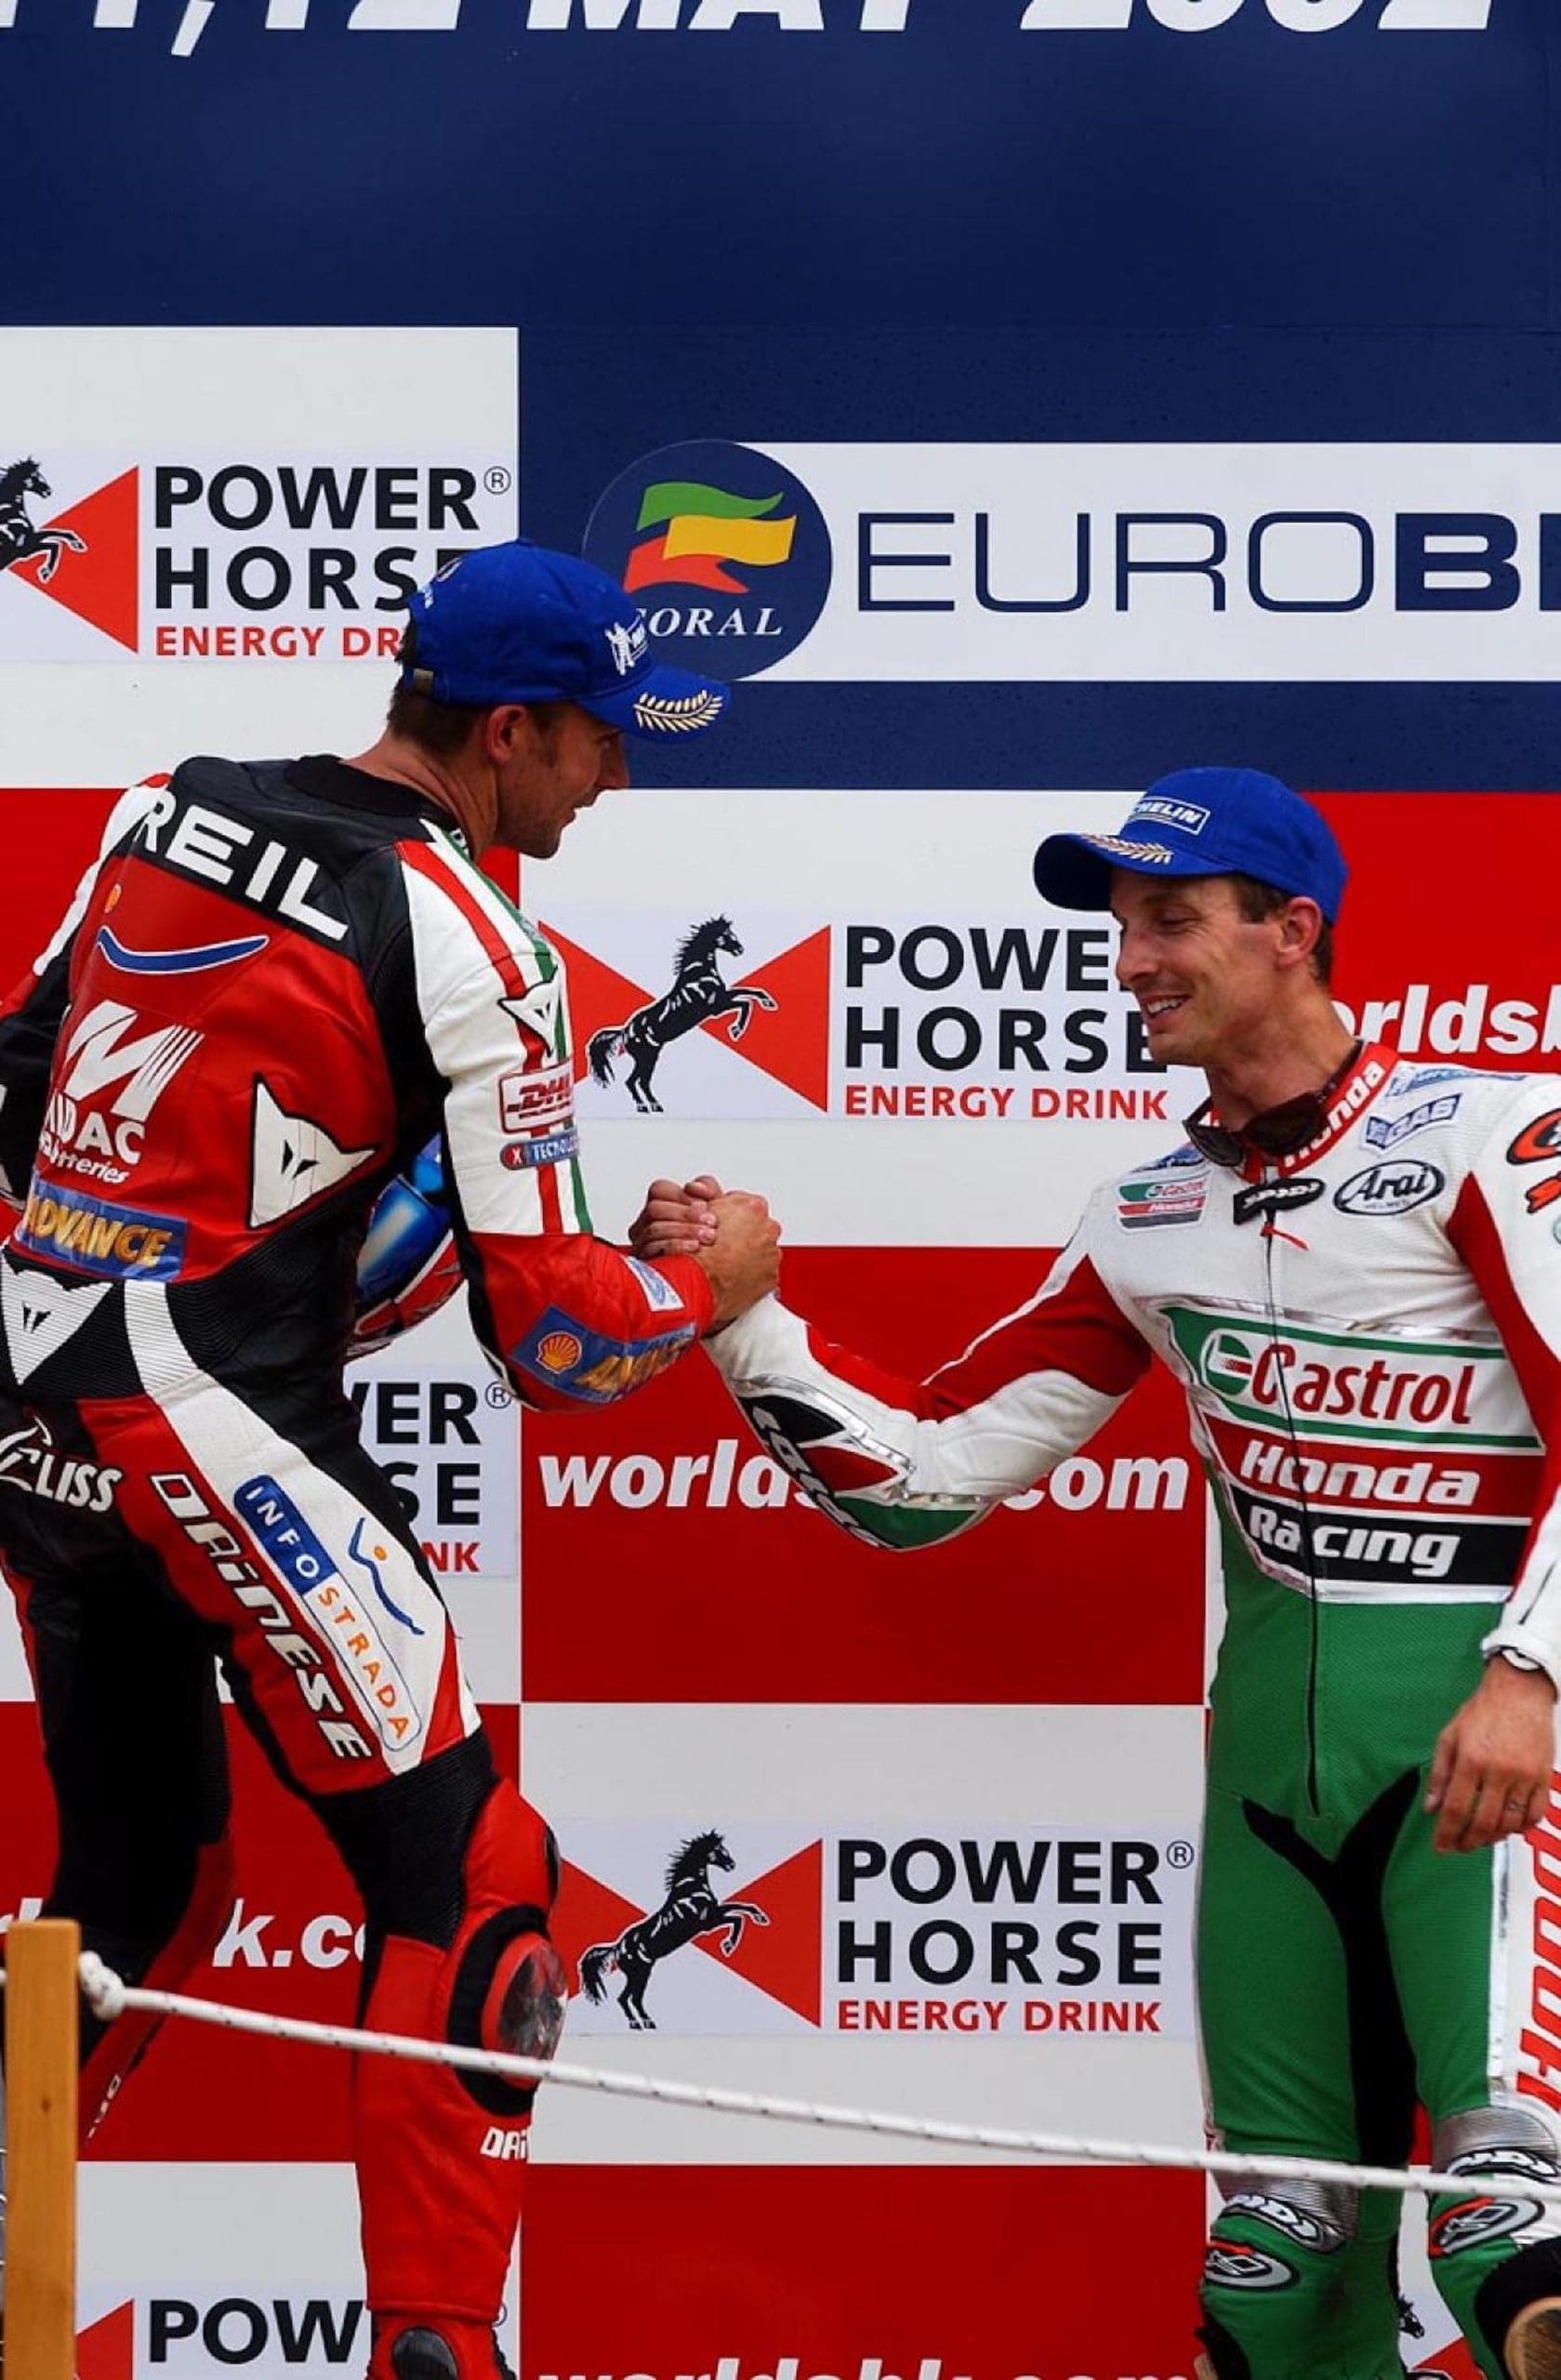 Troy Bayliss and Colin Edwards on the podium for 2002's WorldSBK championship. Media sourced from Crash.net.